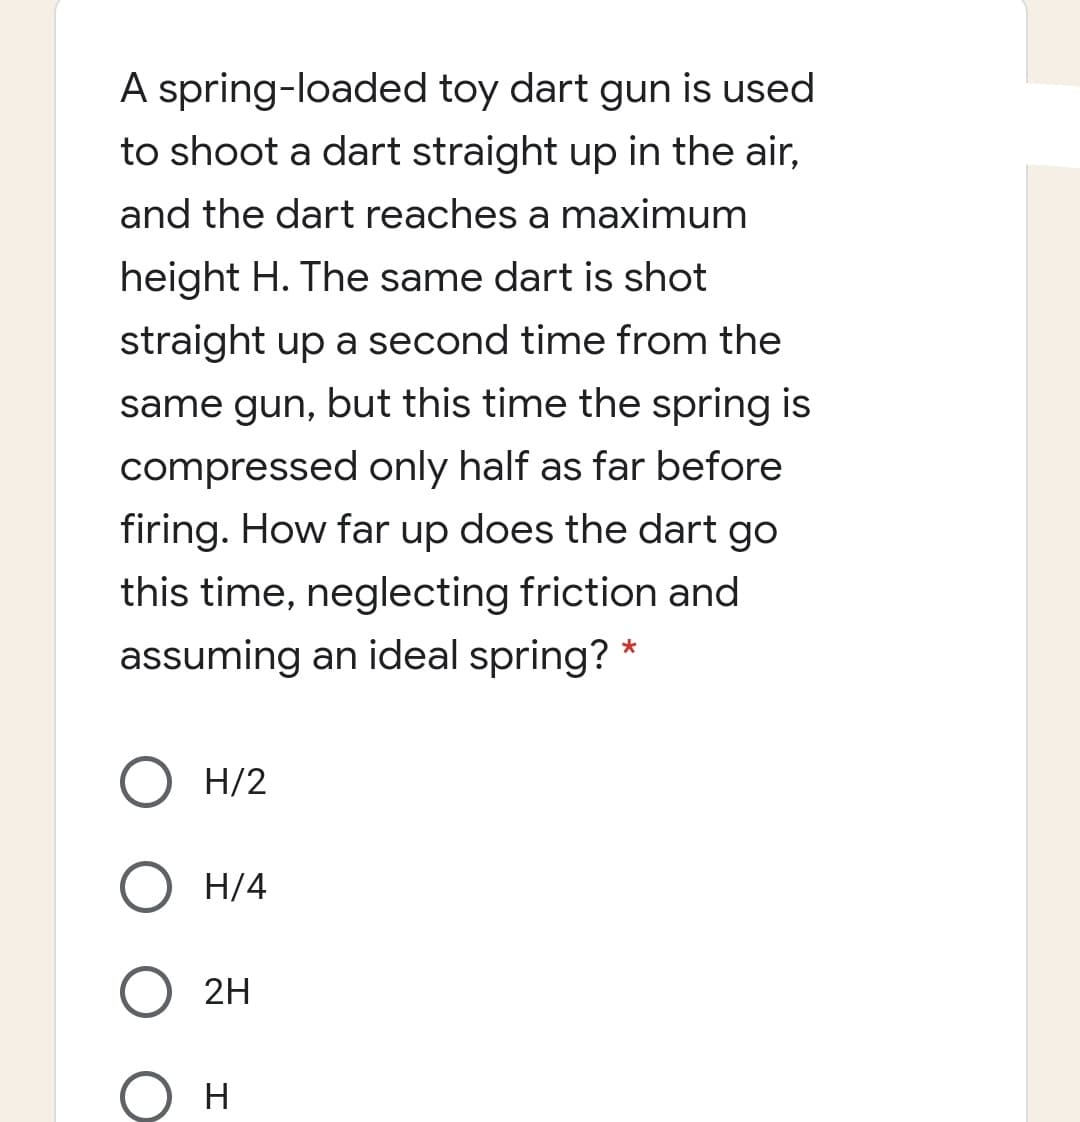 A spring-loaded toy dart gun is used
to shoot a dart straight up in the air,
and the dart reaches a maximum
height H. The same dart is shot
straight up a second time from the
same gun, but this time the spring is
compressed only half as far before
firing. How far up does the dart go
this time, neglecting friction and
assuming an ideal spring? *
H/2
H/4
2H
H
